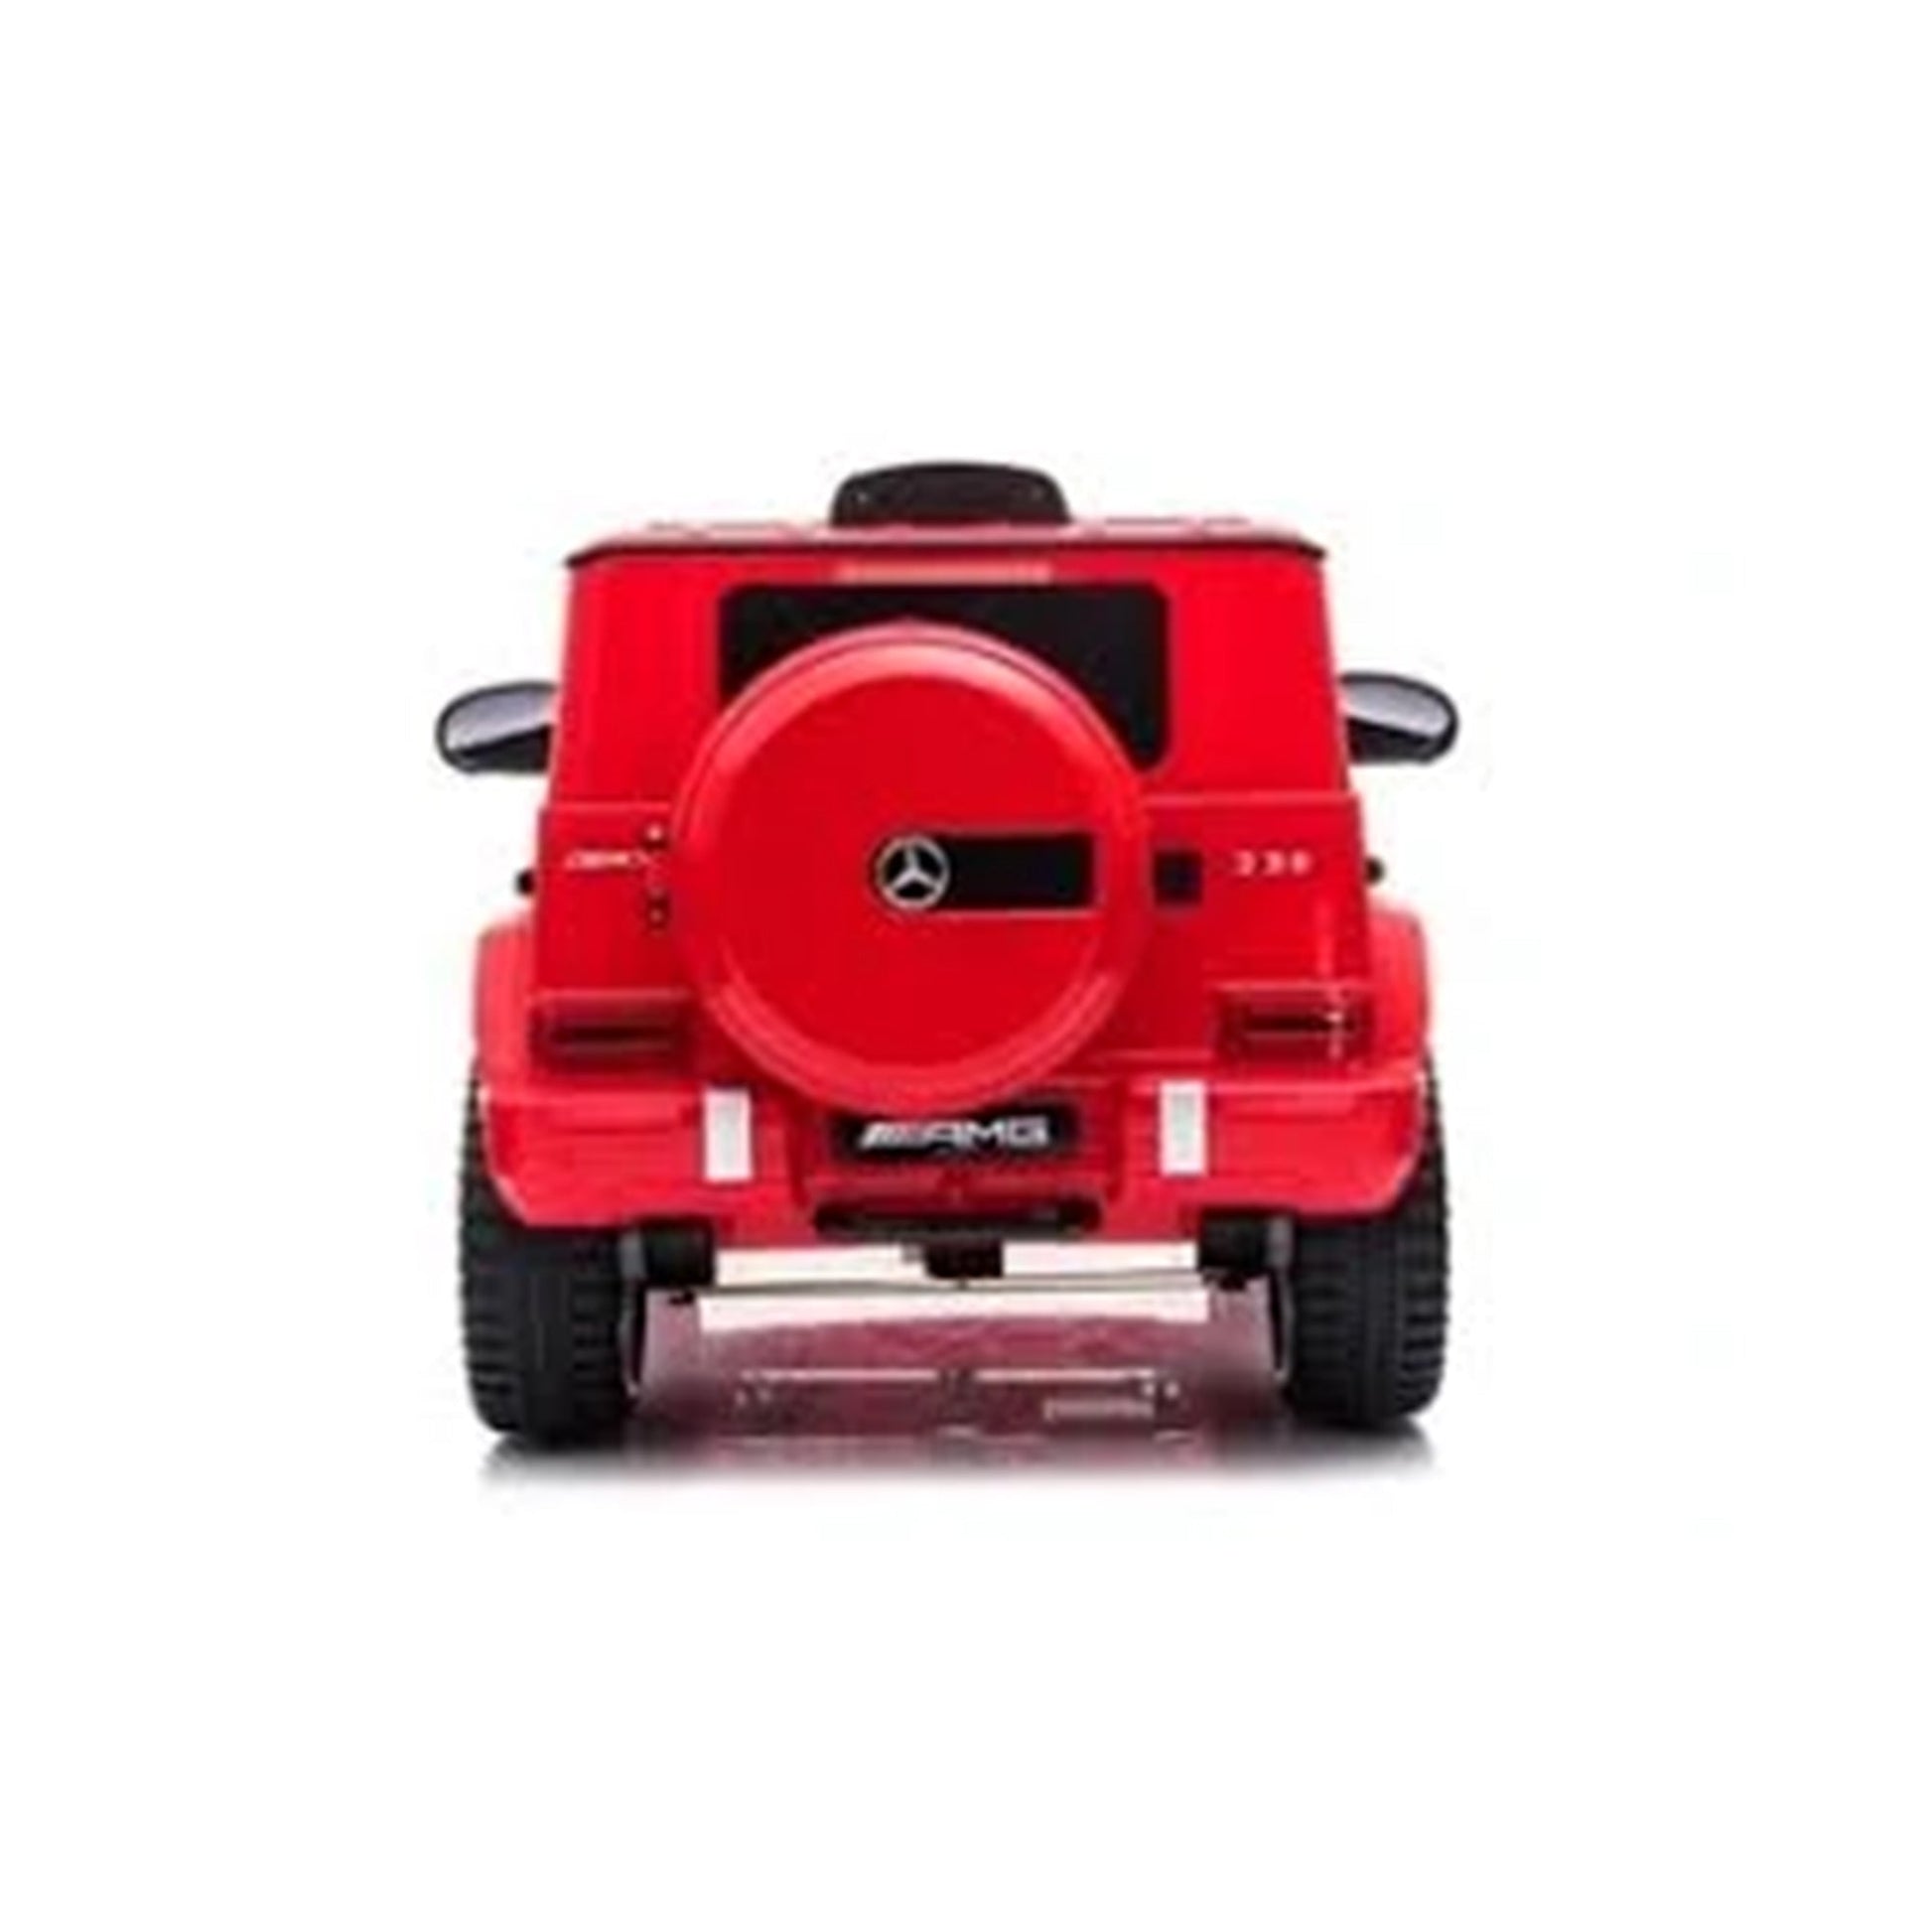 Red Mercedes-Benz G63 AMG 12 Volt Electric Ride-On Car from Kids Car Store.